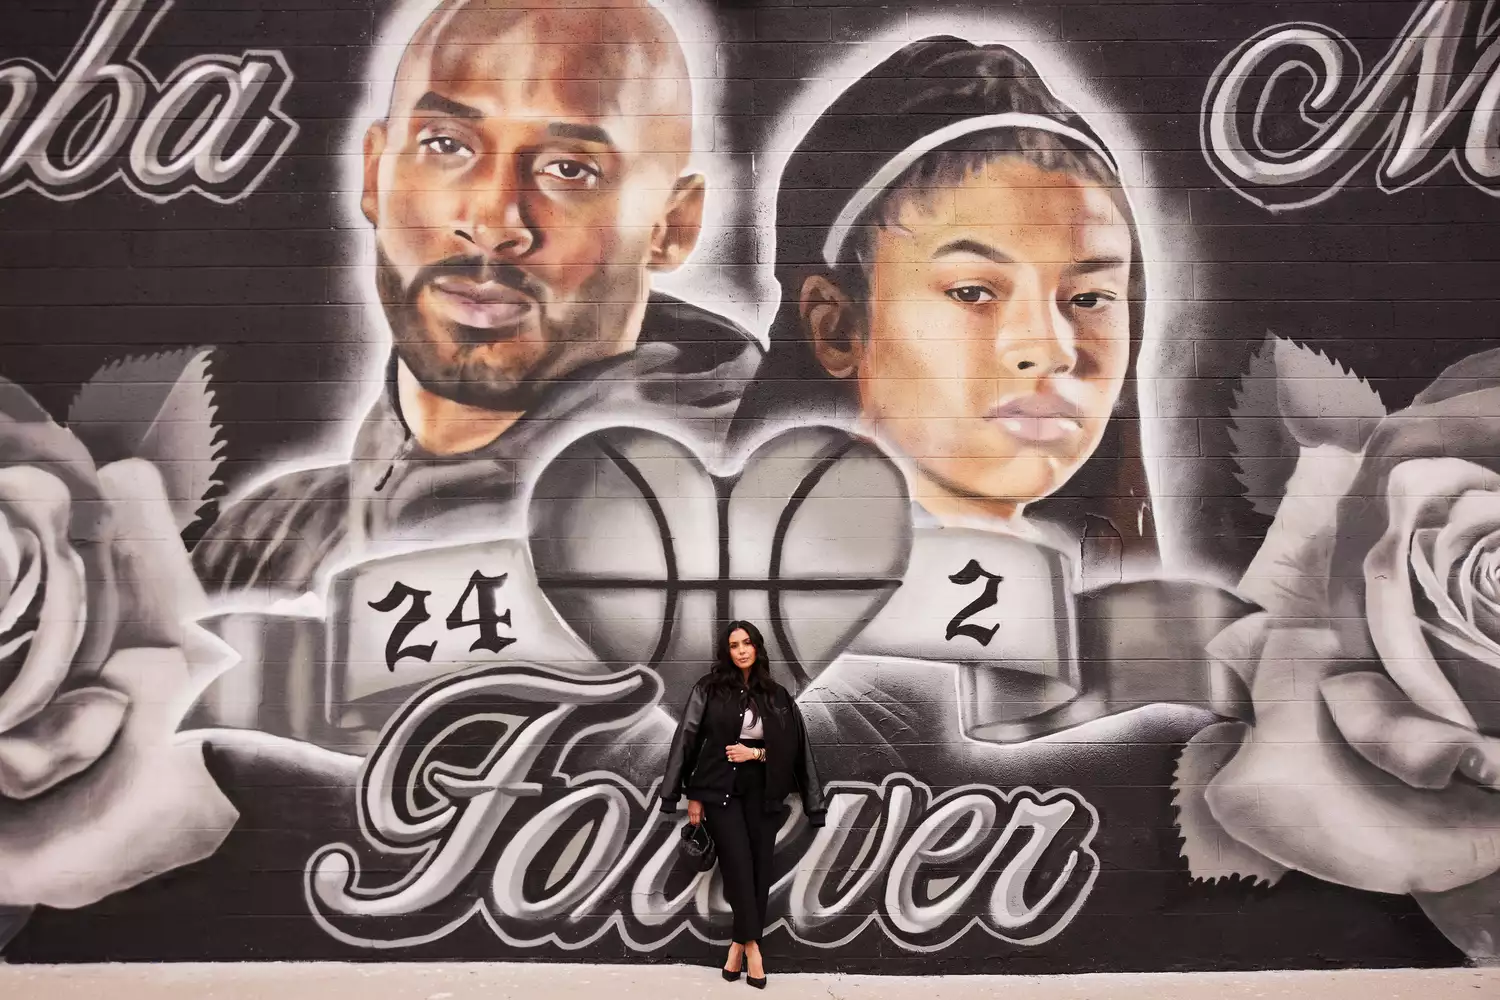 Vanessa Bryant Unveils LA Basketball Court in Partnership with BODYARMOR x MMSF.